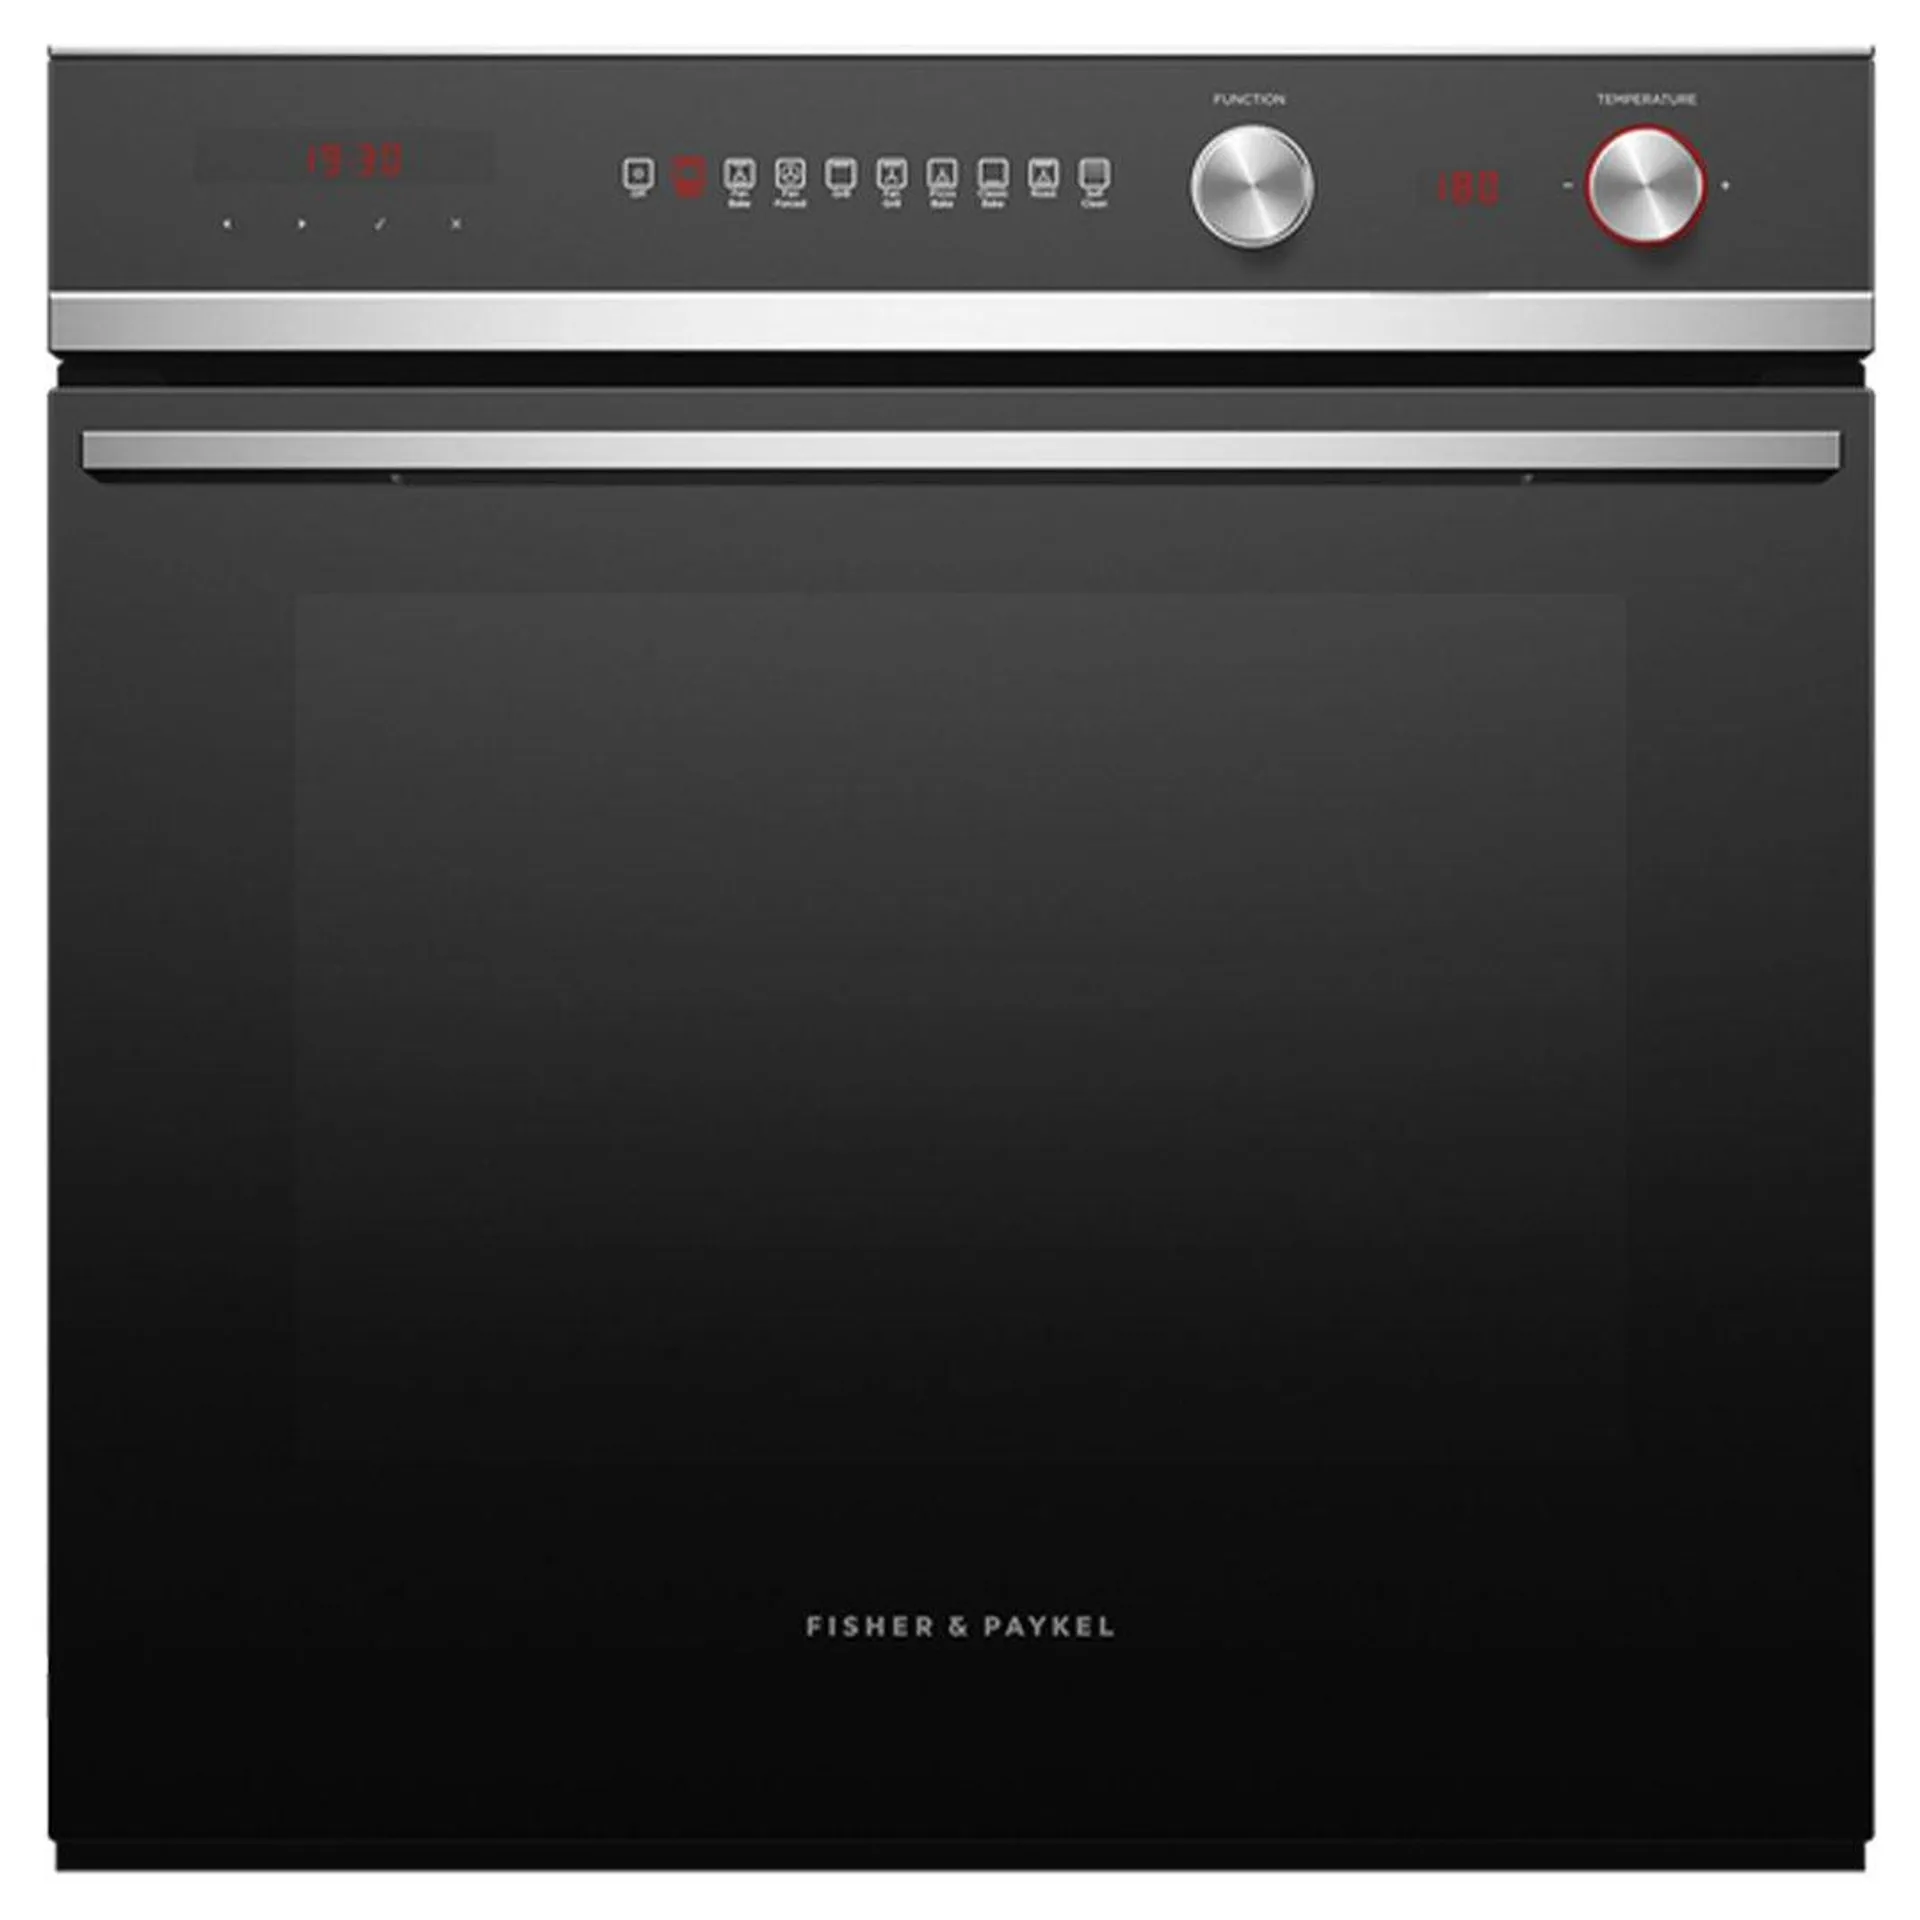 Fisher & Paykel Series 7 Oven, 60cm, 9 Function, Self-cleaning OB60SD9PX2